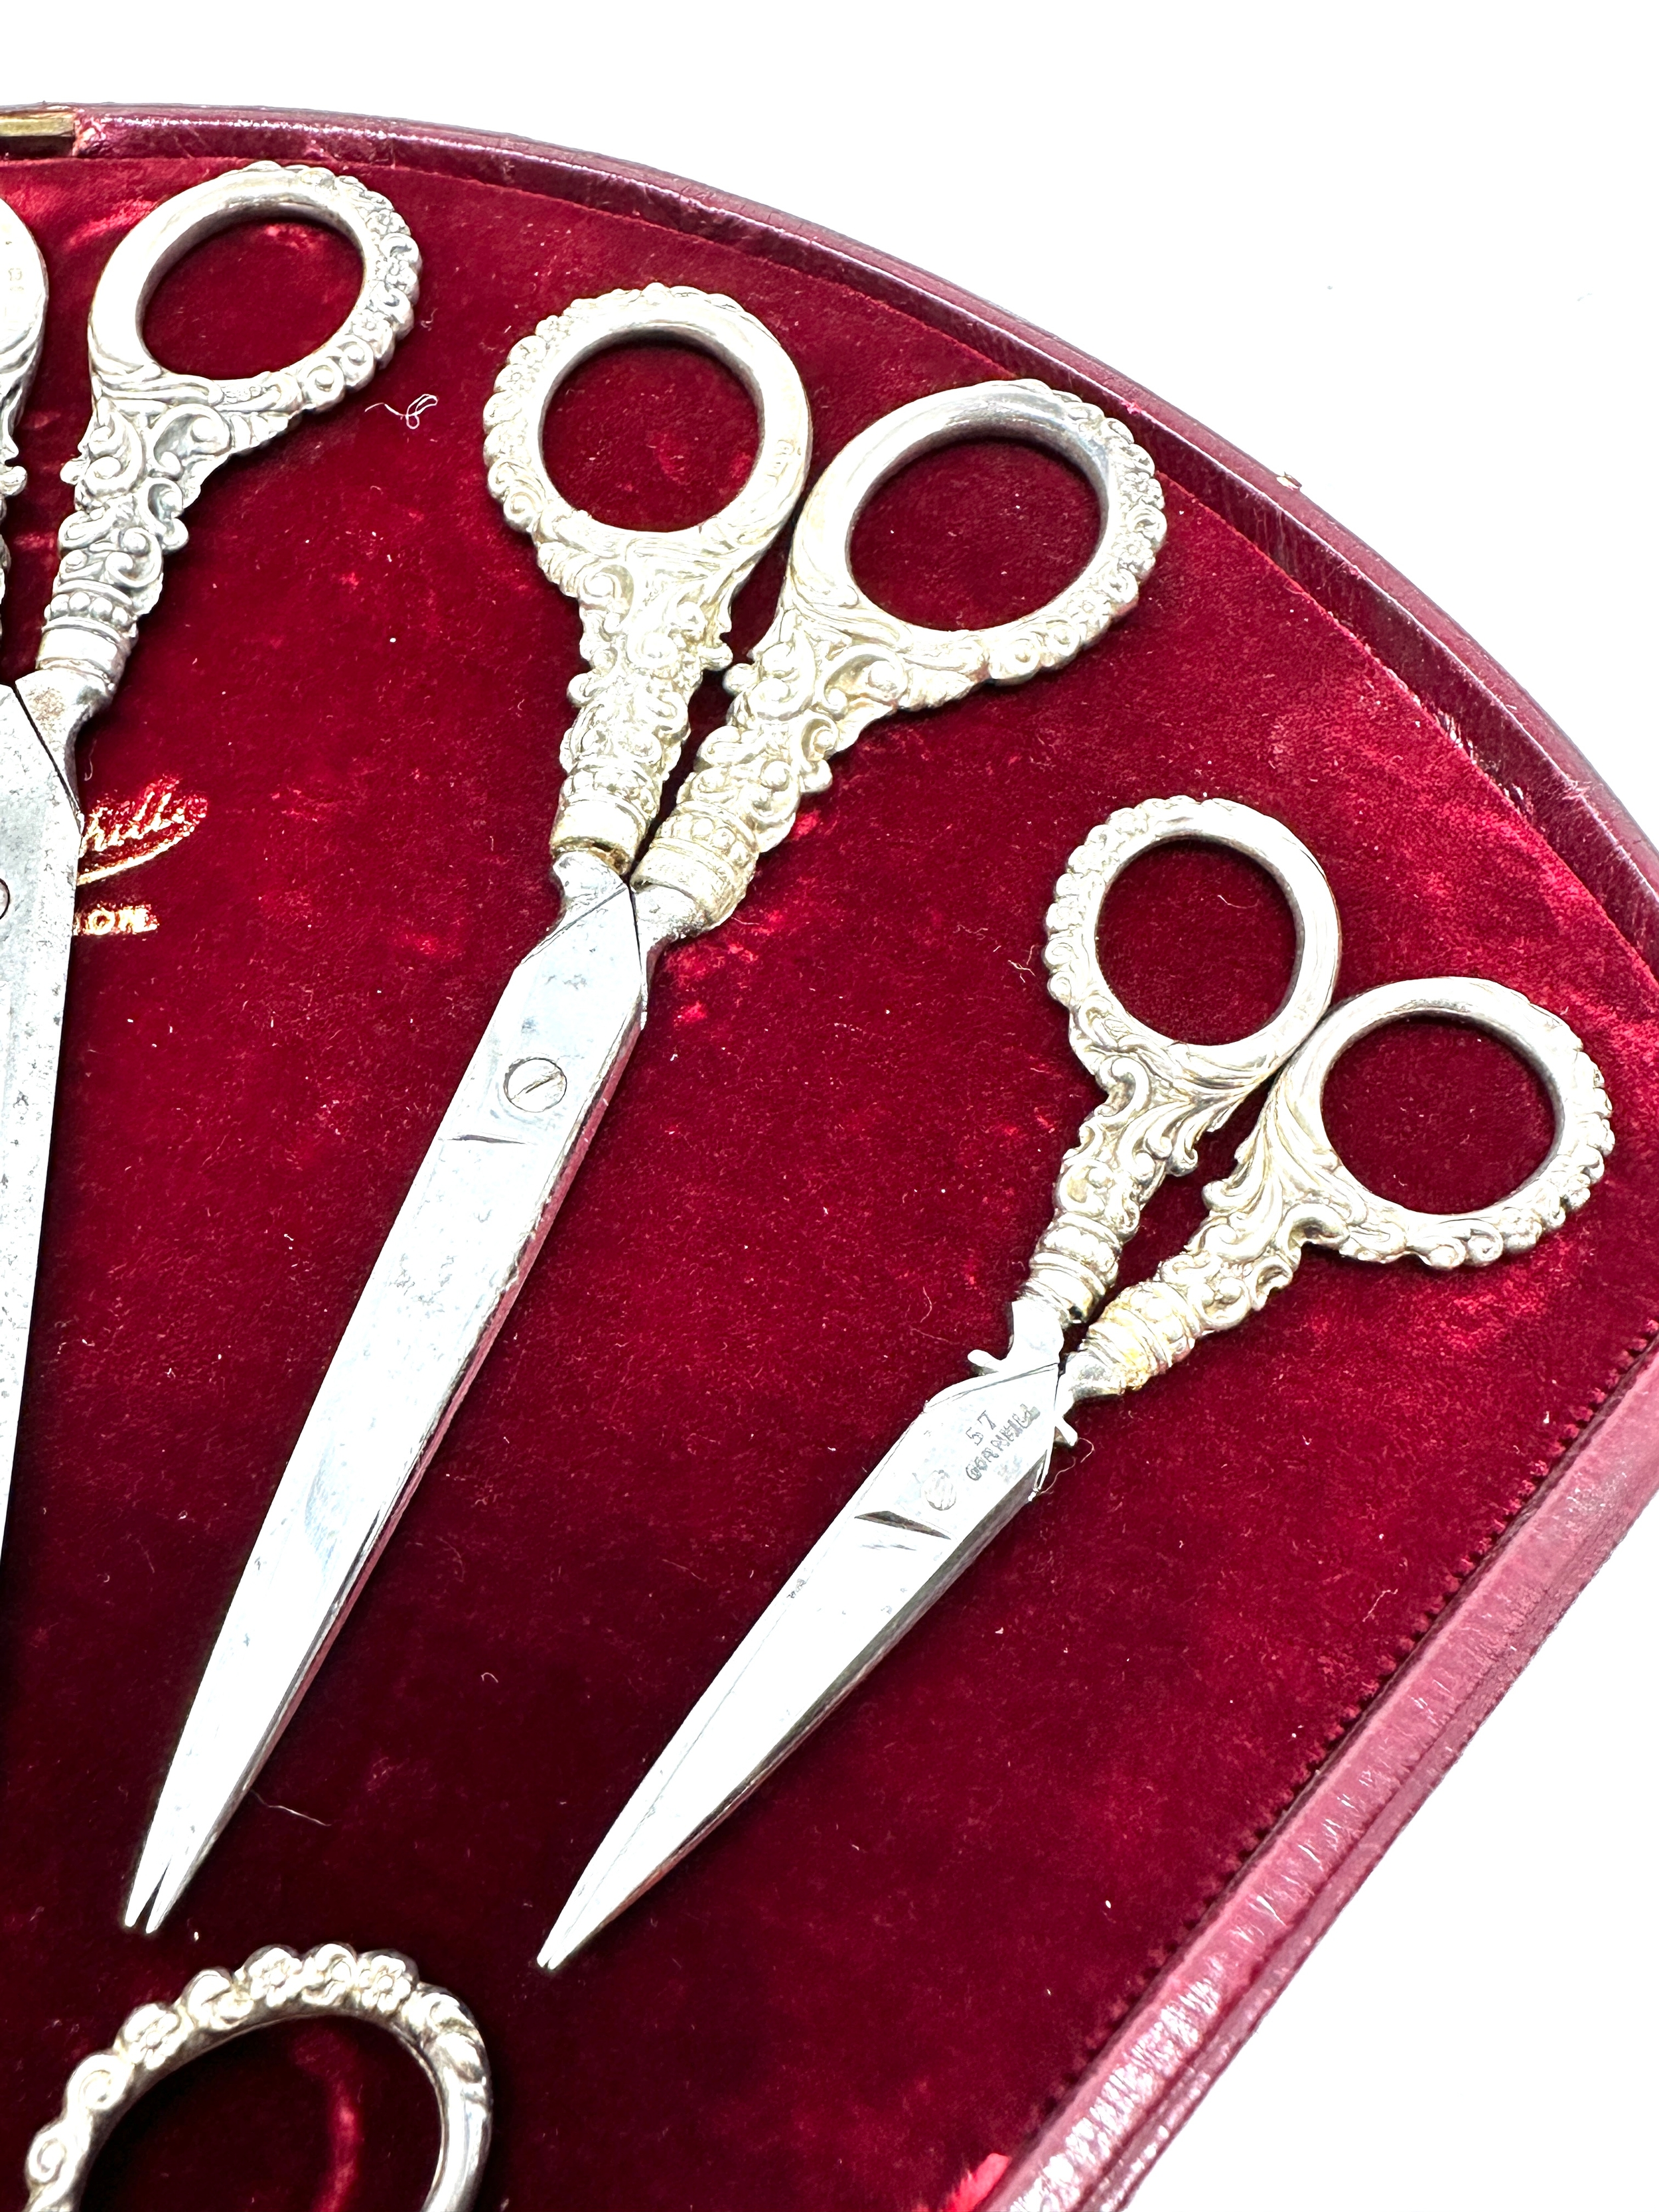 Fine large set of antique silver handle scissors original boxed by Lunds of London - Image 4 of 8